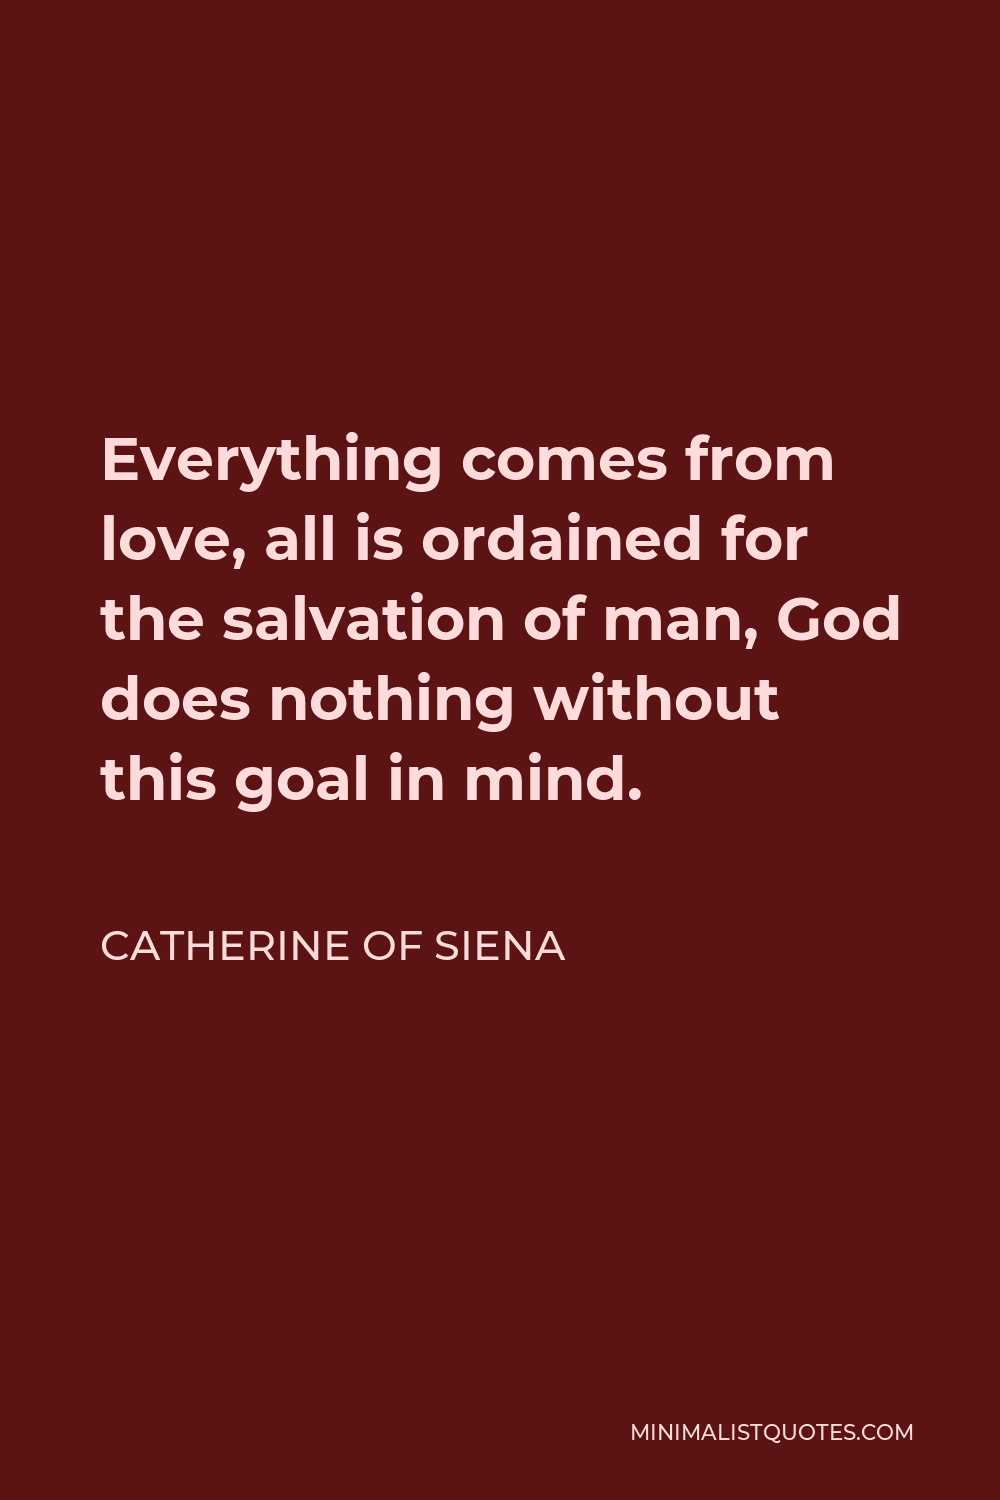 Catherine of Siena Quote - Everything comes from love, all is ordained for the salvation of man, God does nothing without this goal in mind.